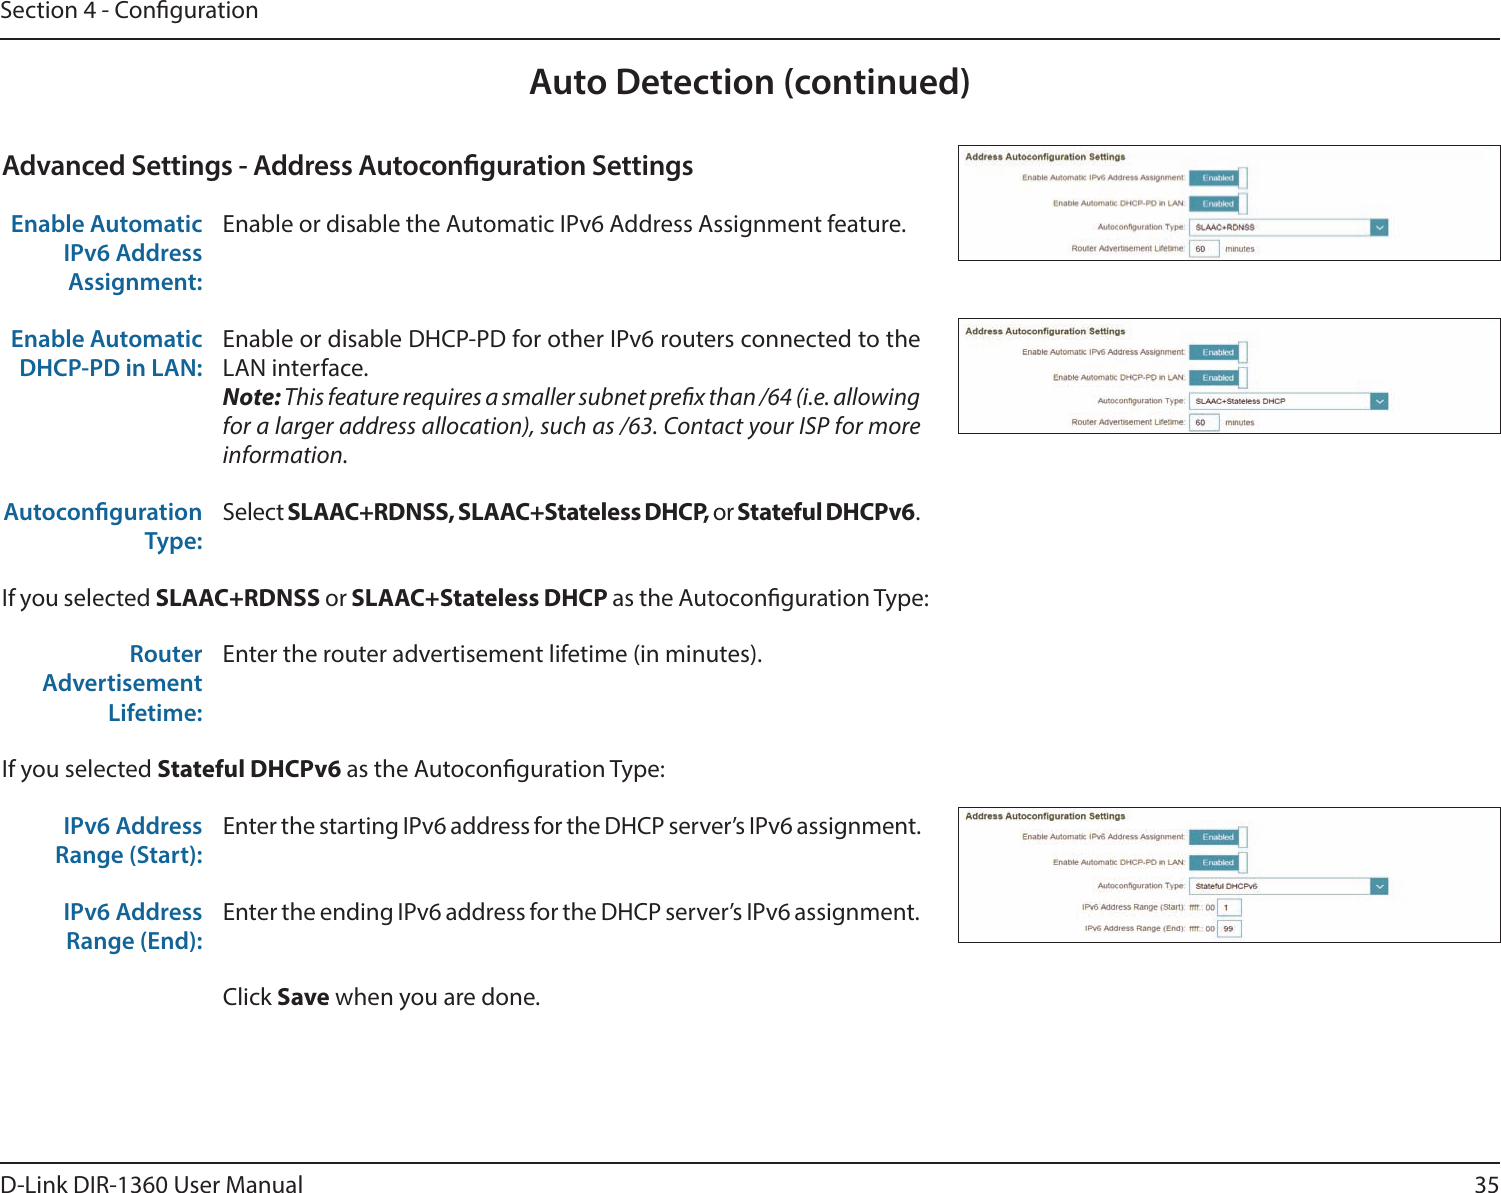 35D-Link DIR-1360 User ManualSection 4 - CongurationAuto Detection (continued)Advanced Settings - Address Autoconguration SettingsEnable Automatic IPv6 Address Assignment:Enable or disable the Automatic IPv6 Address Assignment feature.Enable Automatic DHCP-PD in LAN:Enable or disable DHCP-PD for other IPv6 routers connected to the LAN interface.Note: This feature requires a smaller subnet prex than /64 (i.e. allowing for a larger address allocation), such as /63. Contact your ISP for more information.Autoconguration Type:Select SLAAC+RDNSS, SLAAC+Stateless DHCP, or Stateful DHCPv6.If you selected SLAAC+RDNSS or SLAAC+Stateless DHCP as the Autoconguration Type:Router Advertisement Lifetime:Enter the router advertisement lifetime (in minutes).If you selected Stateful DHCPv6 as the Autoconguration Type:IPv6 Address Range (Start):Enter the starting IPv6 address for the DHCP server’s IPv6 assignment.IPv6 Address Range (End):Enter the ending IPv6 address for the DHCP server’s IPv6 assignment.Click Save when you are done.